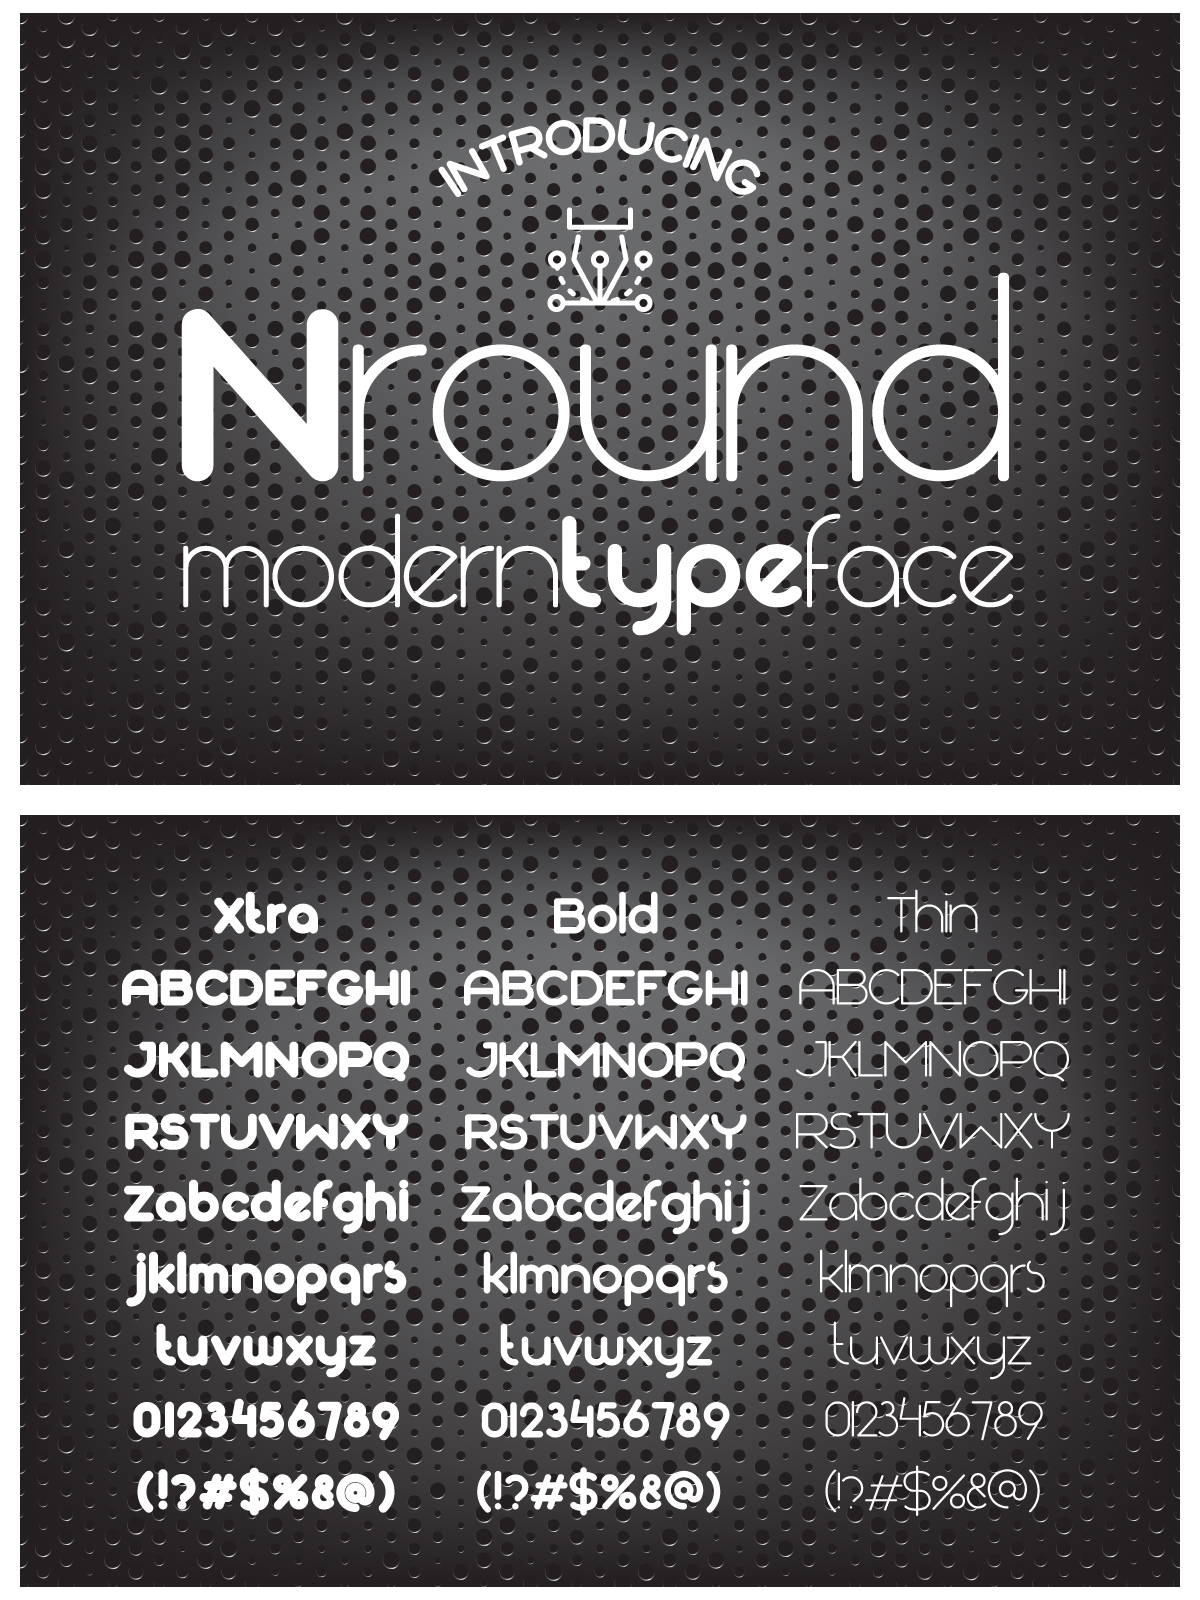 Nround font pinterest image preview.